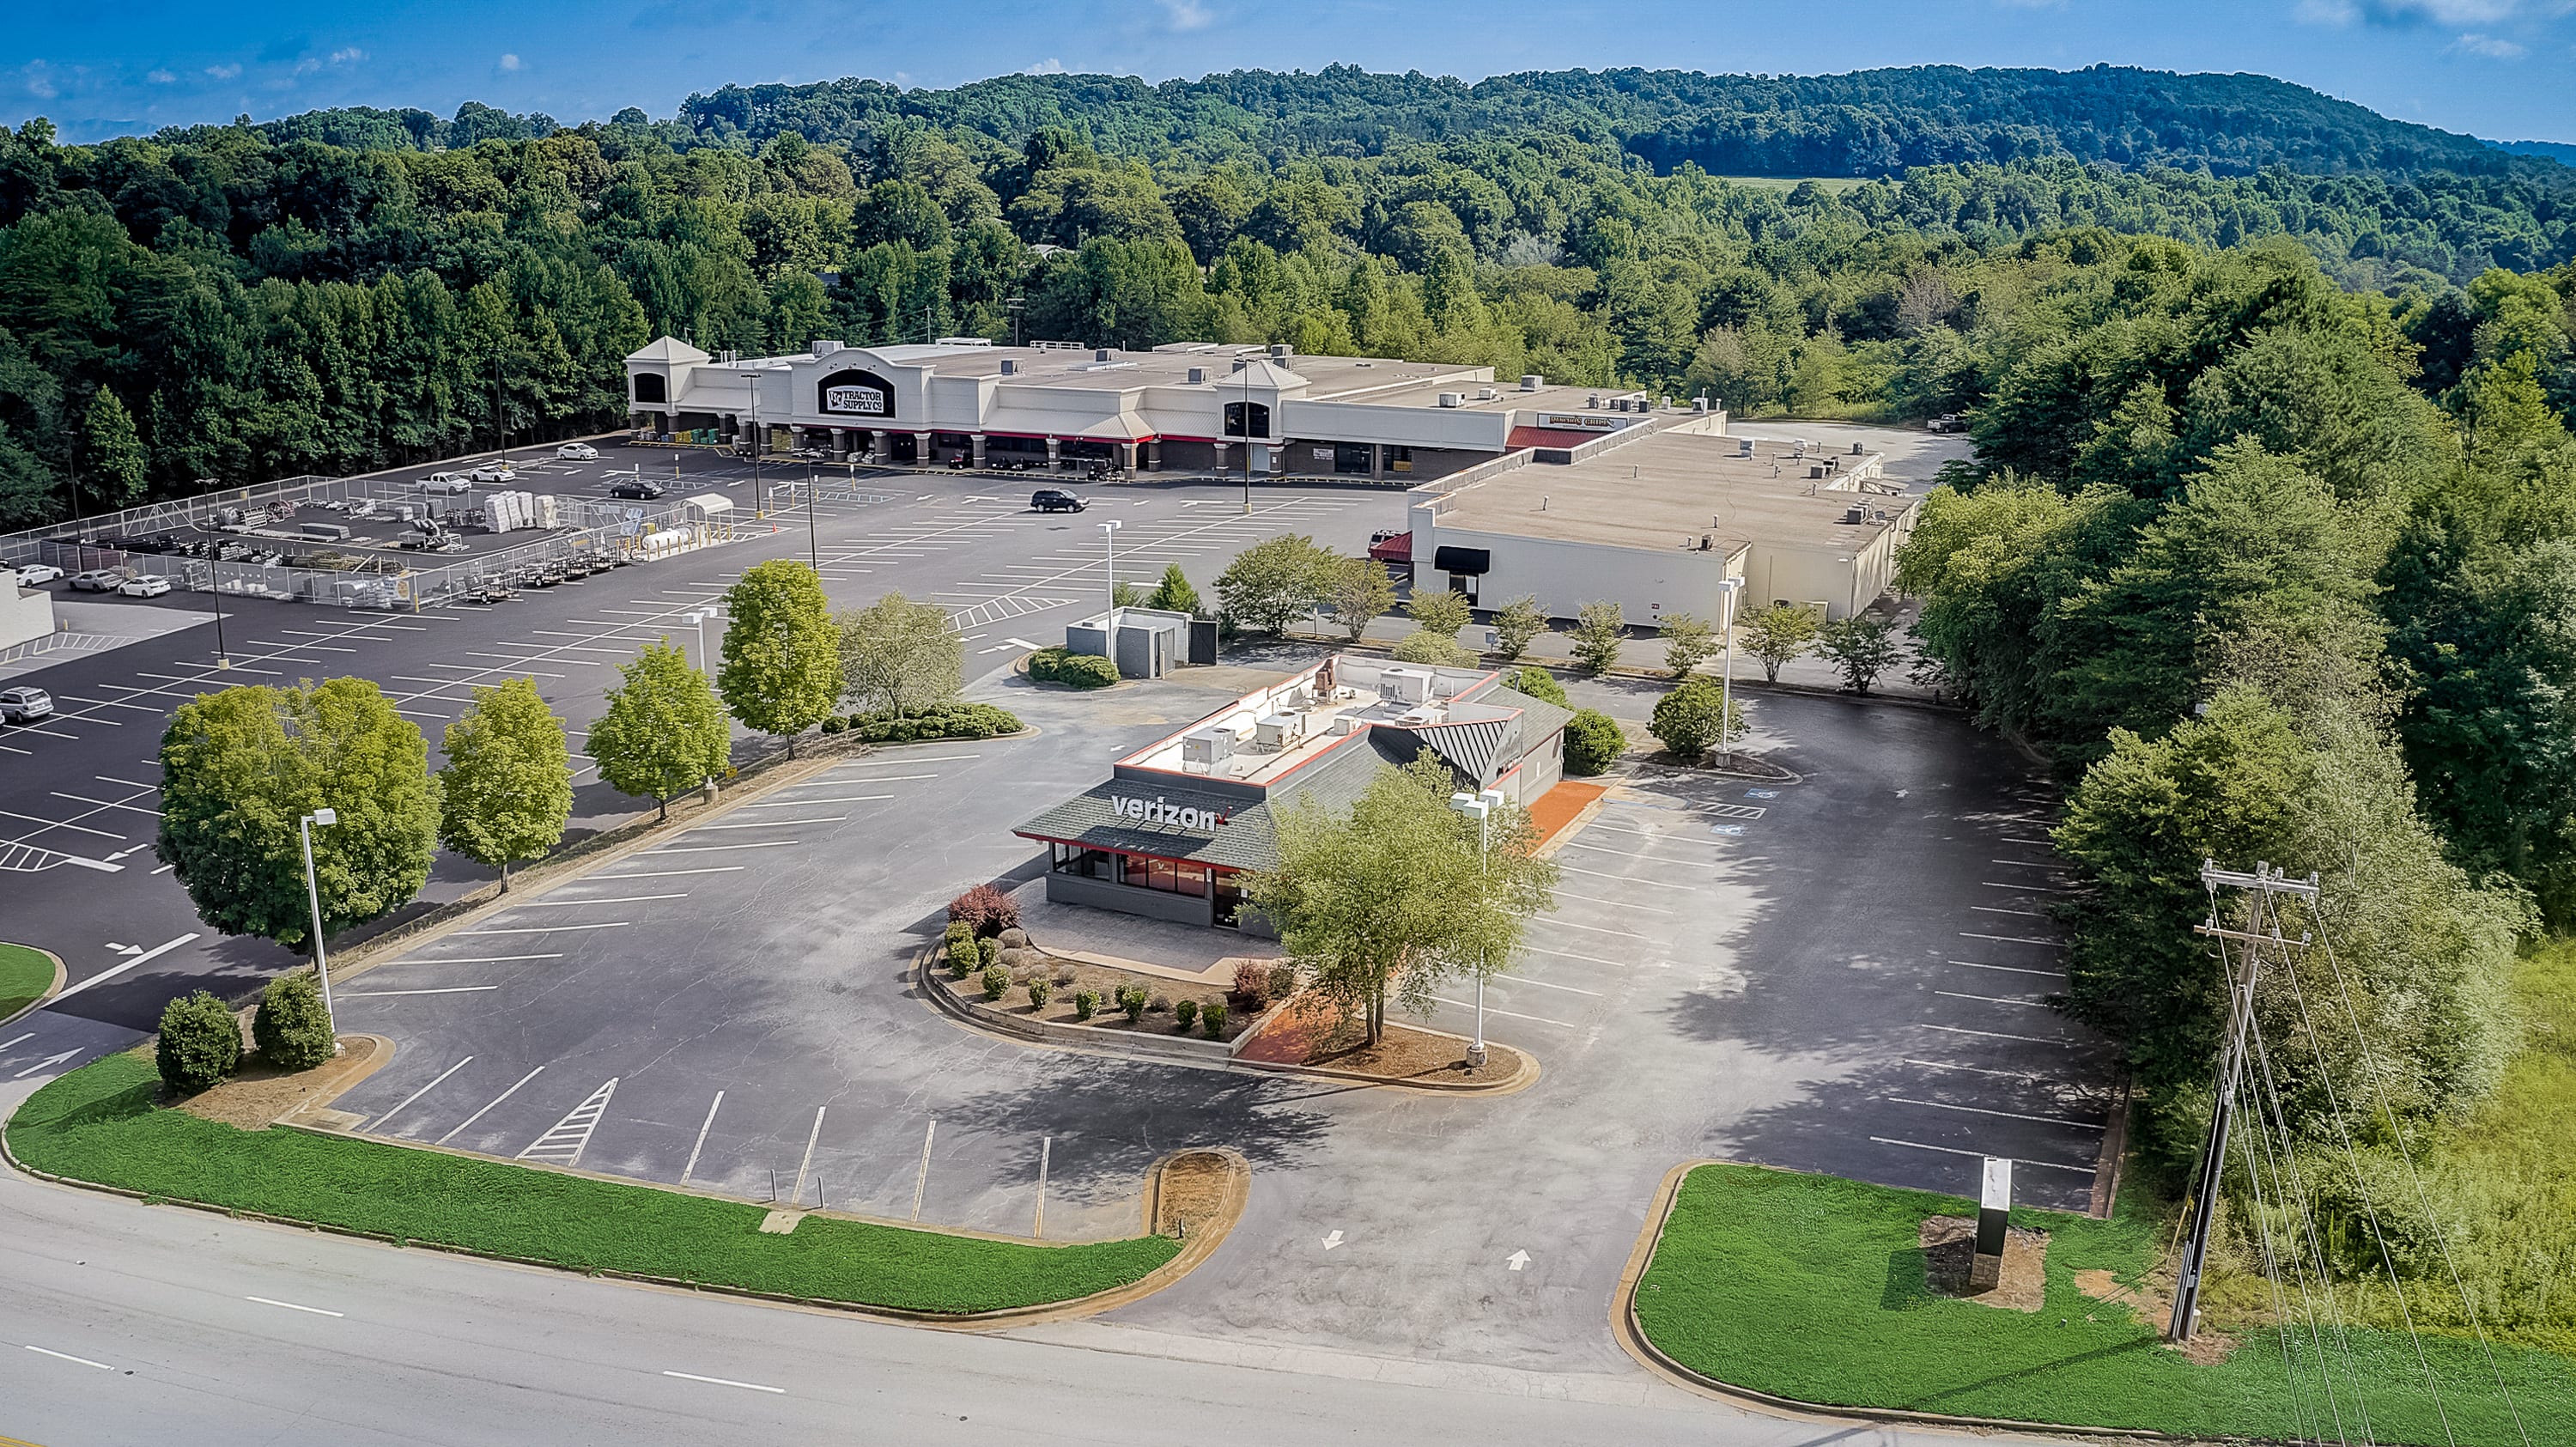 Commercial Properties for Sale or Lease in Greenville, SC